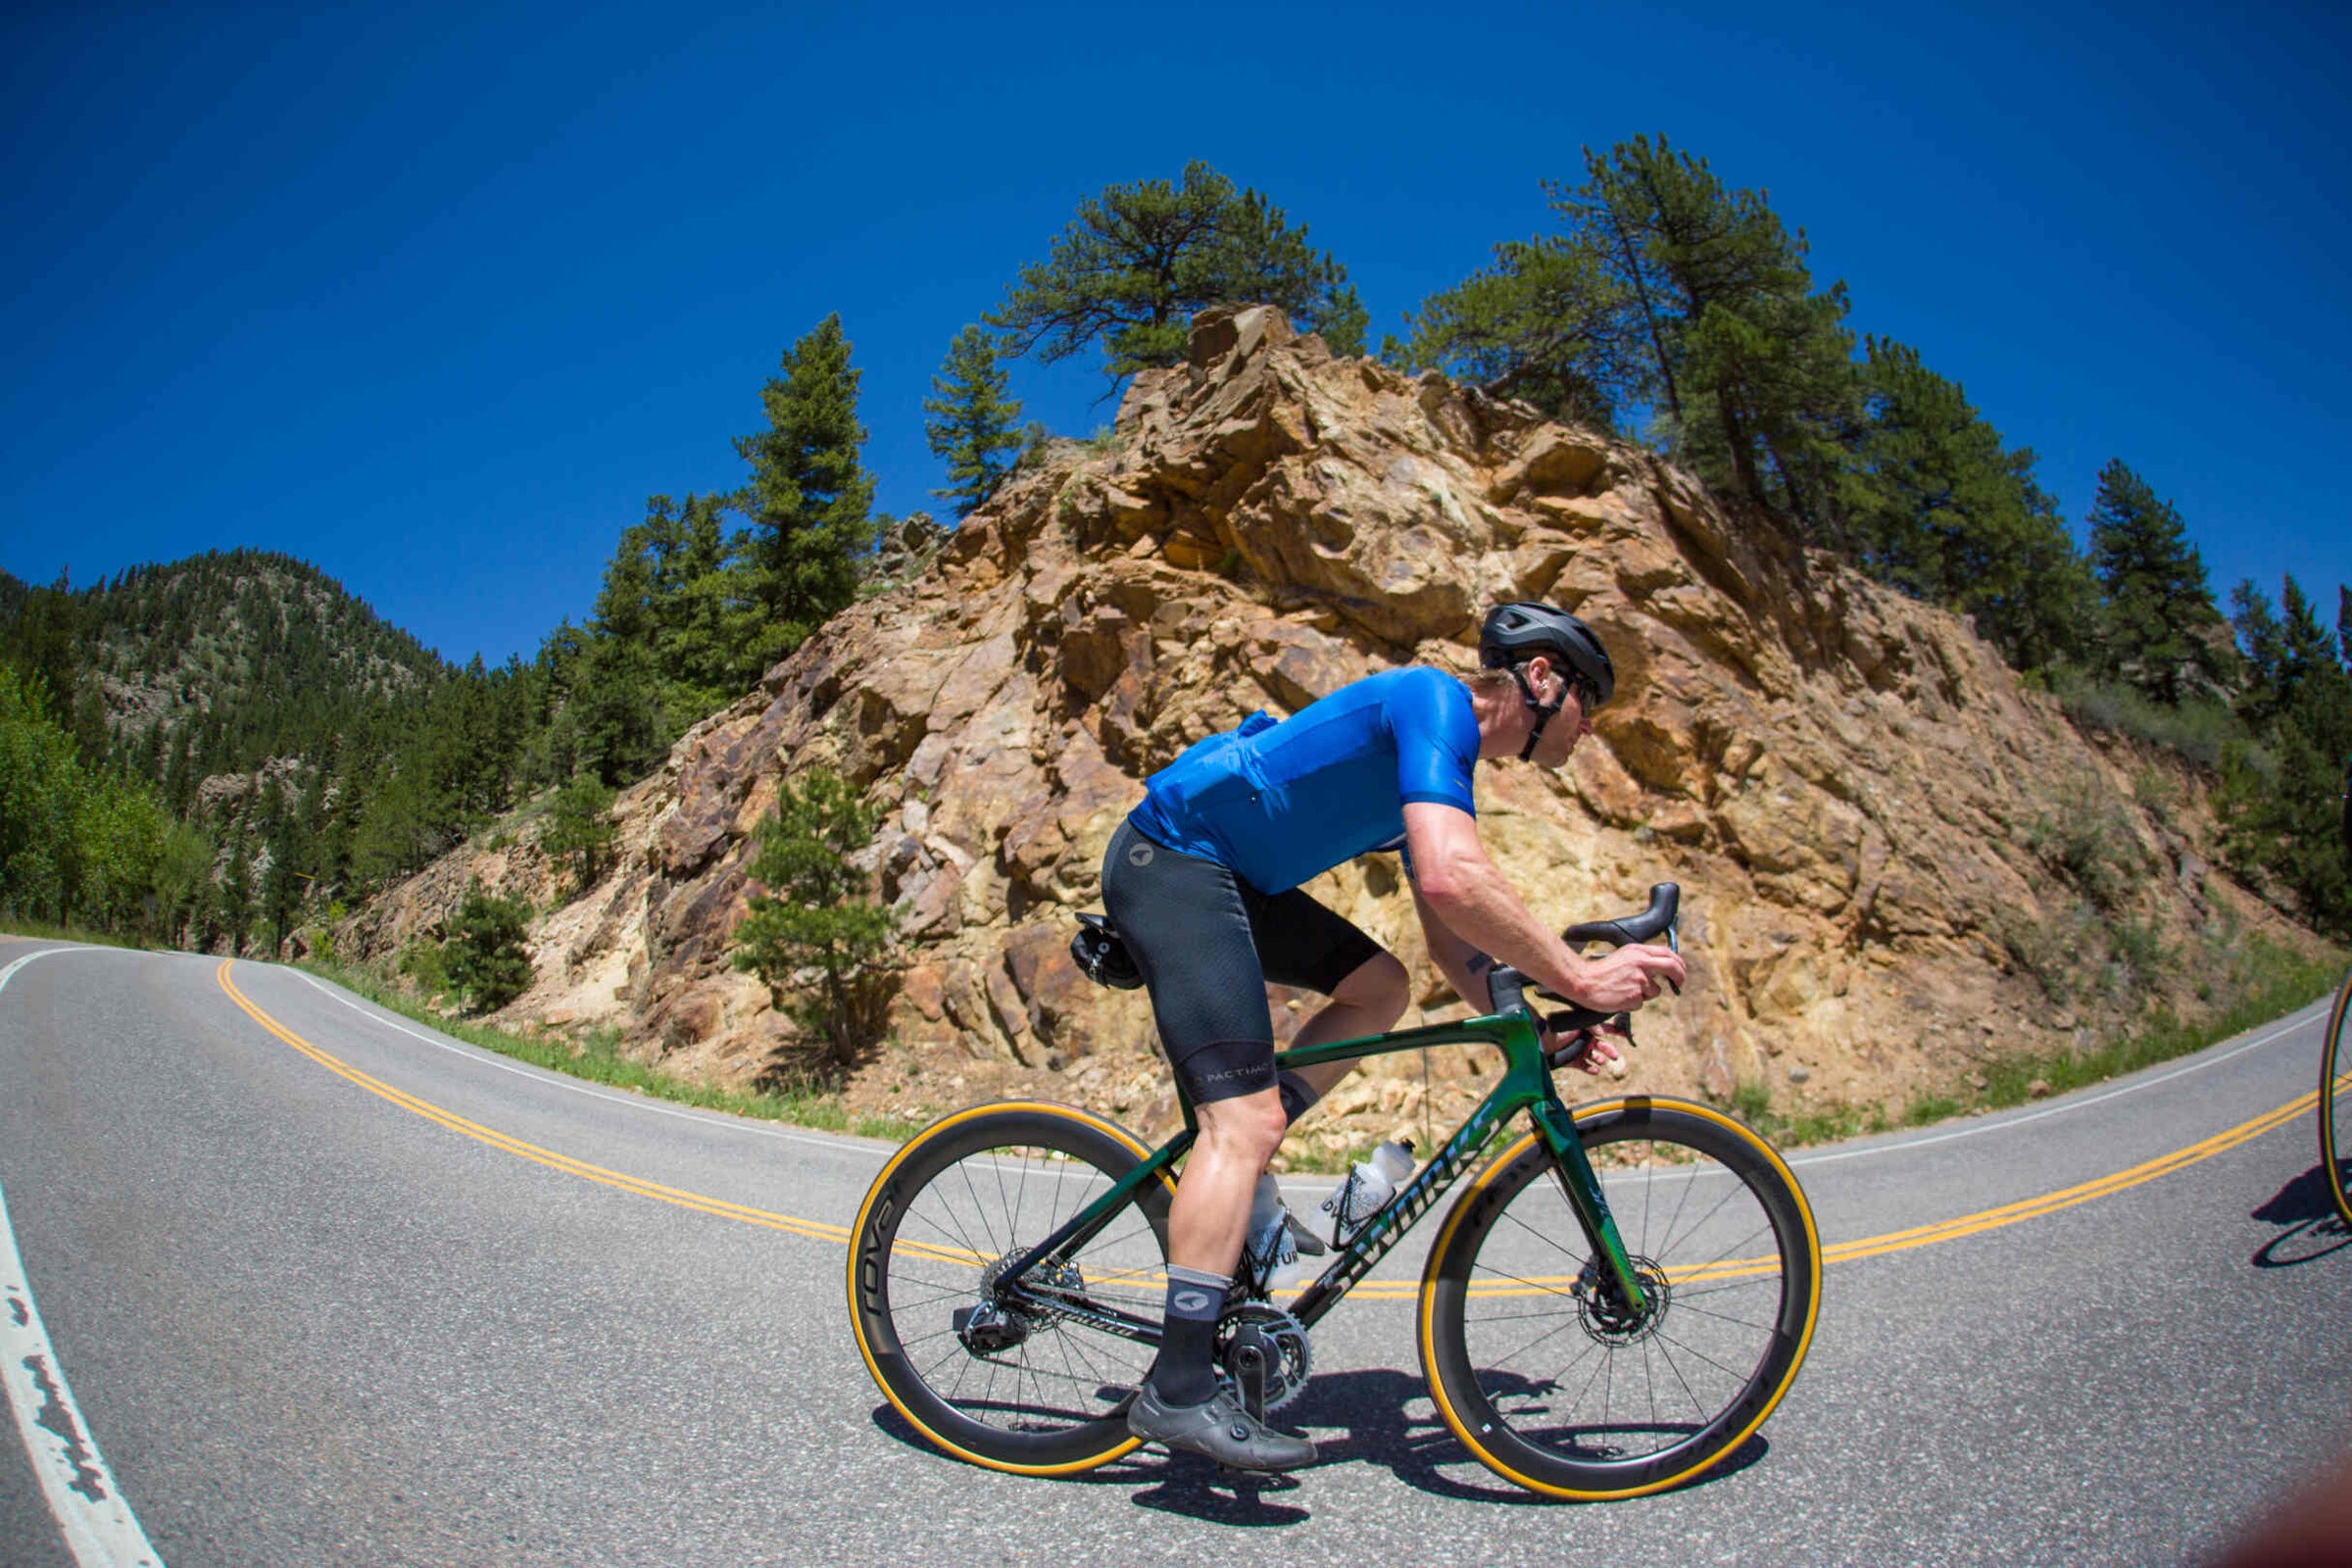 What To Wear Cycling in Warm Weather